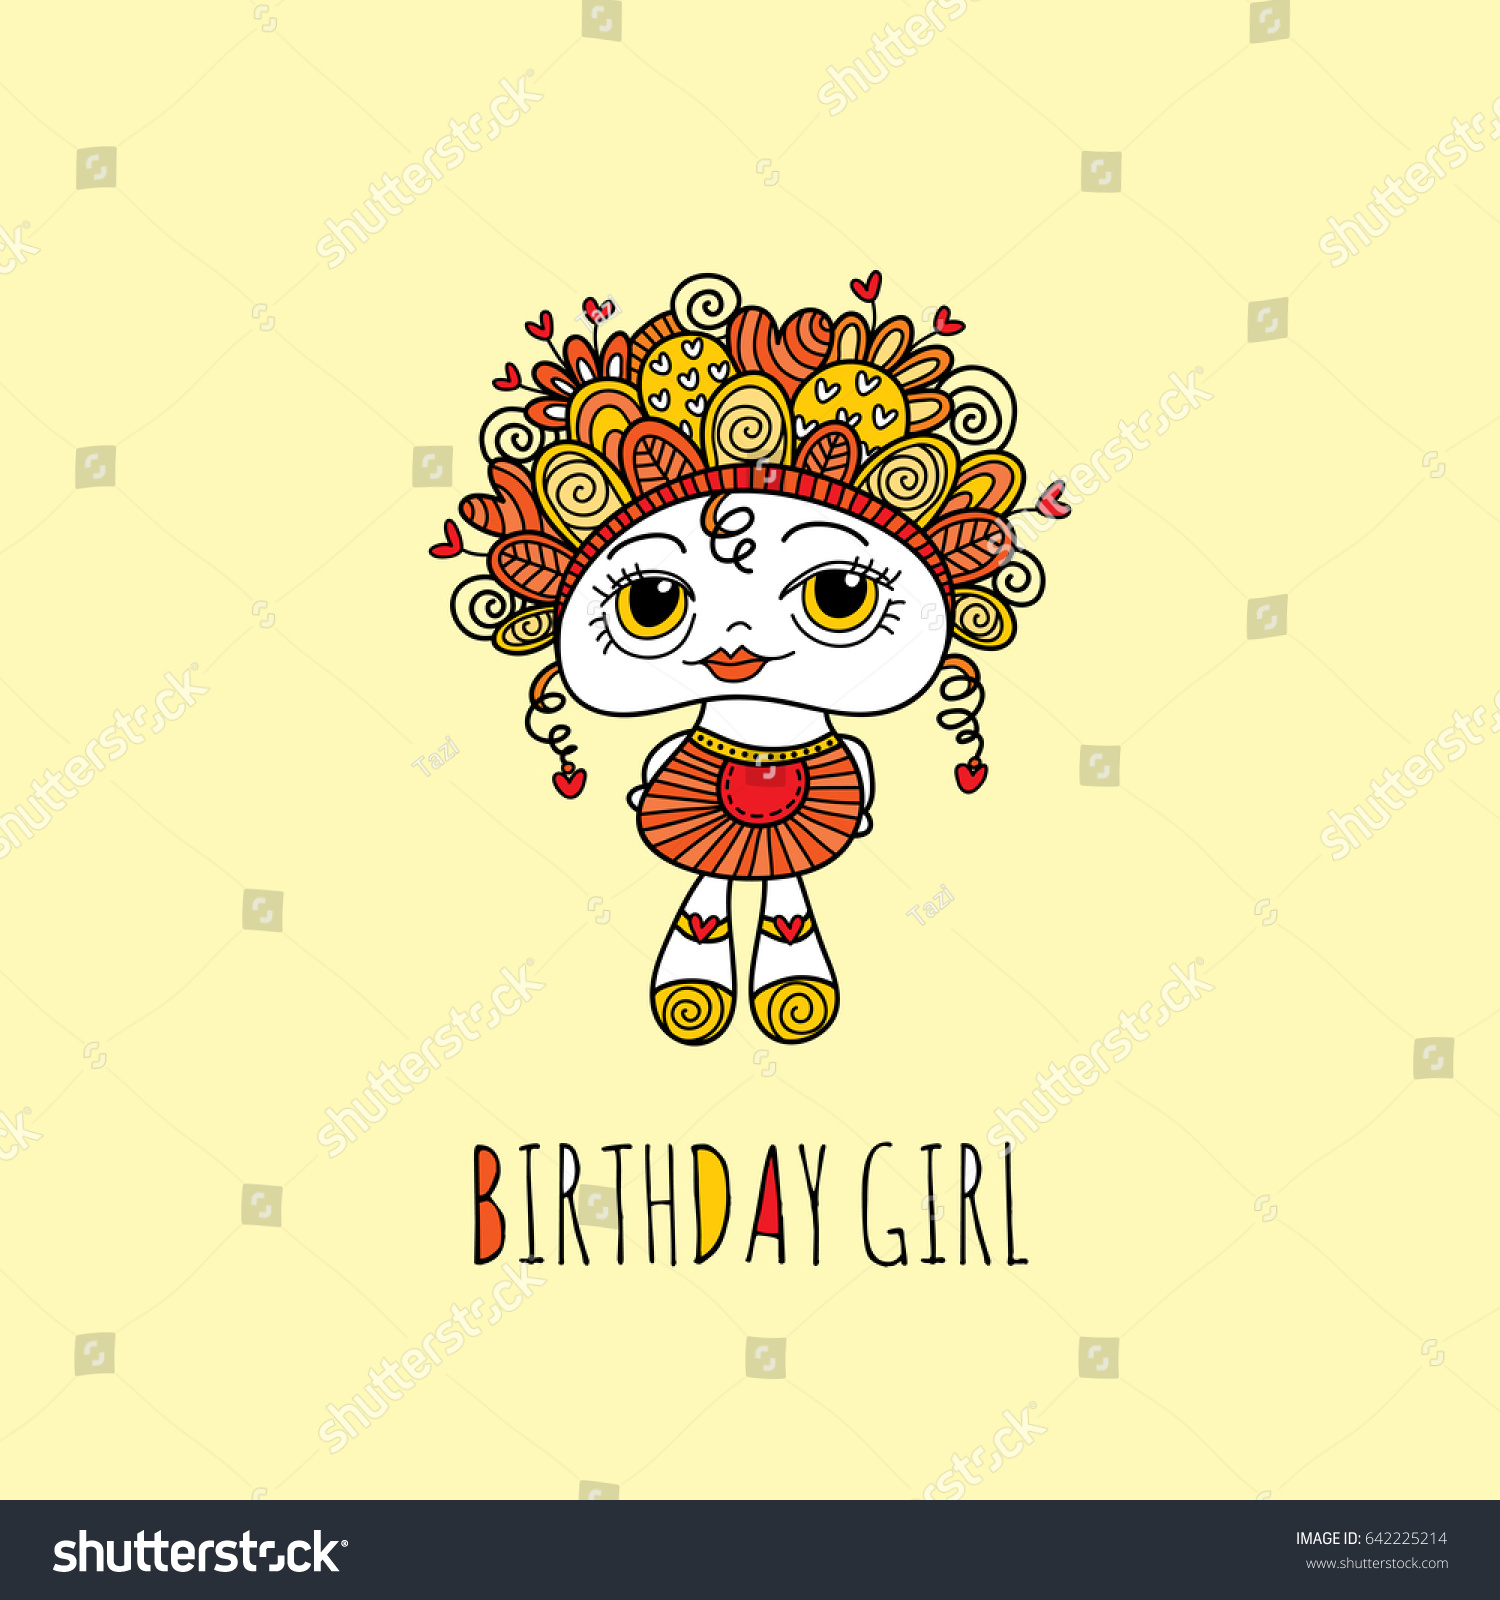 Birthday Girl Cute And Fun Doodle Doll Vector Illustration With